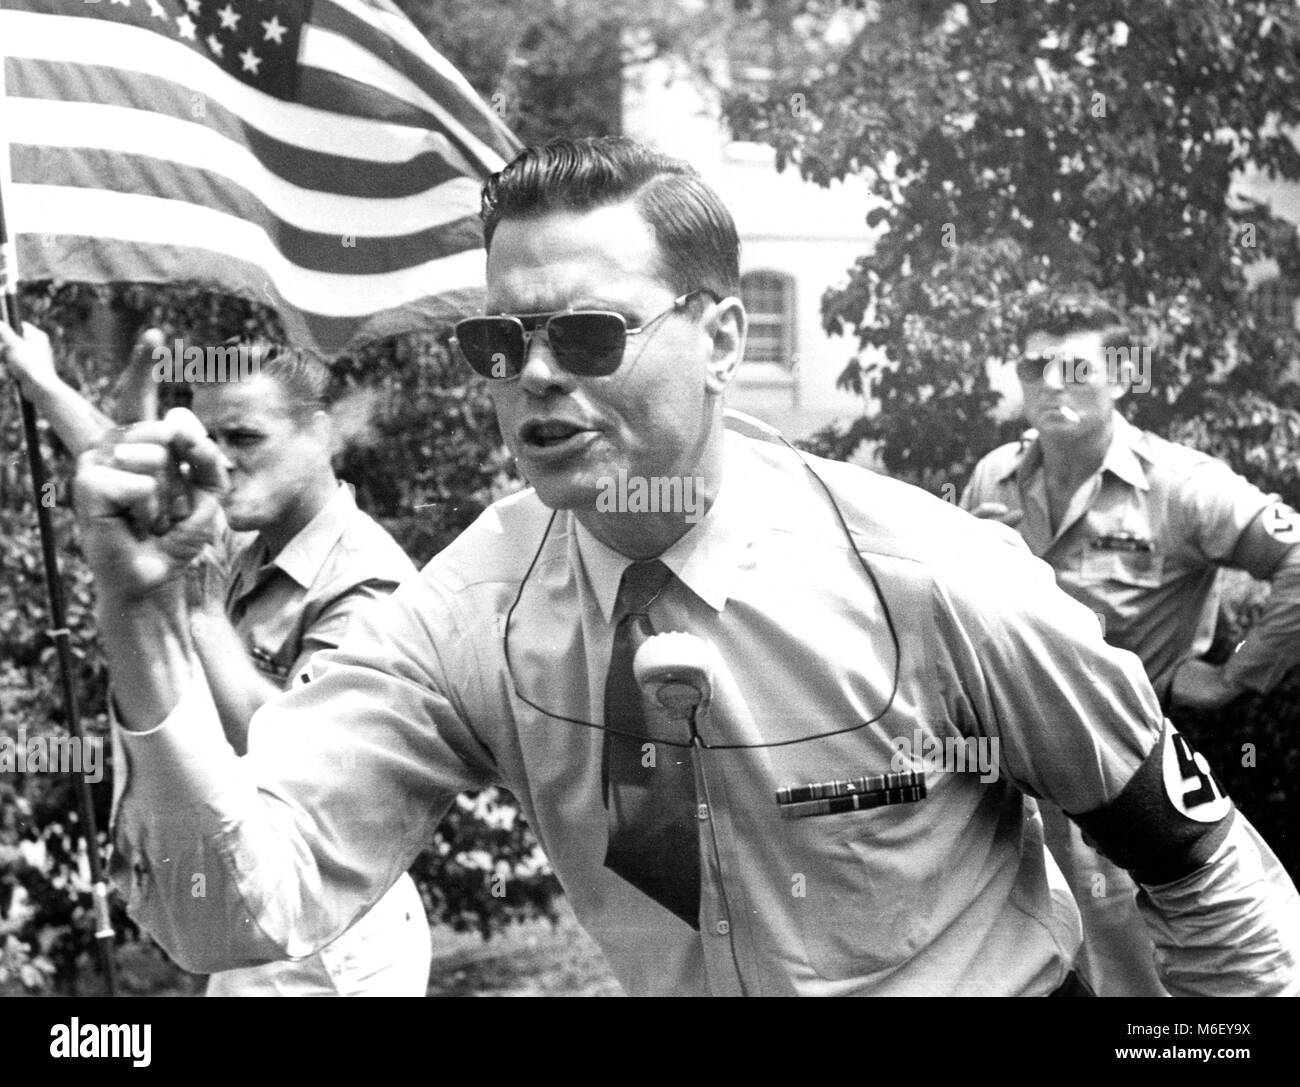 George Lincoln Rockwell, leader of the American Nazi Party, delivering a pro-Nazi speech before a group of followers wearing swastika armbands, Washington, DC, 07/24/1960. Stock Photo